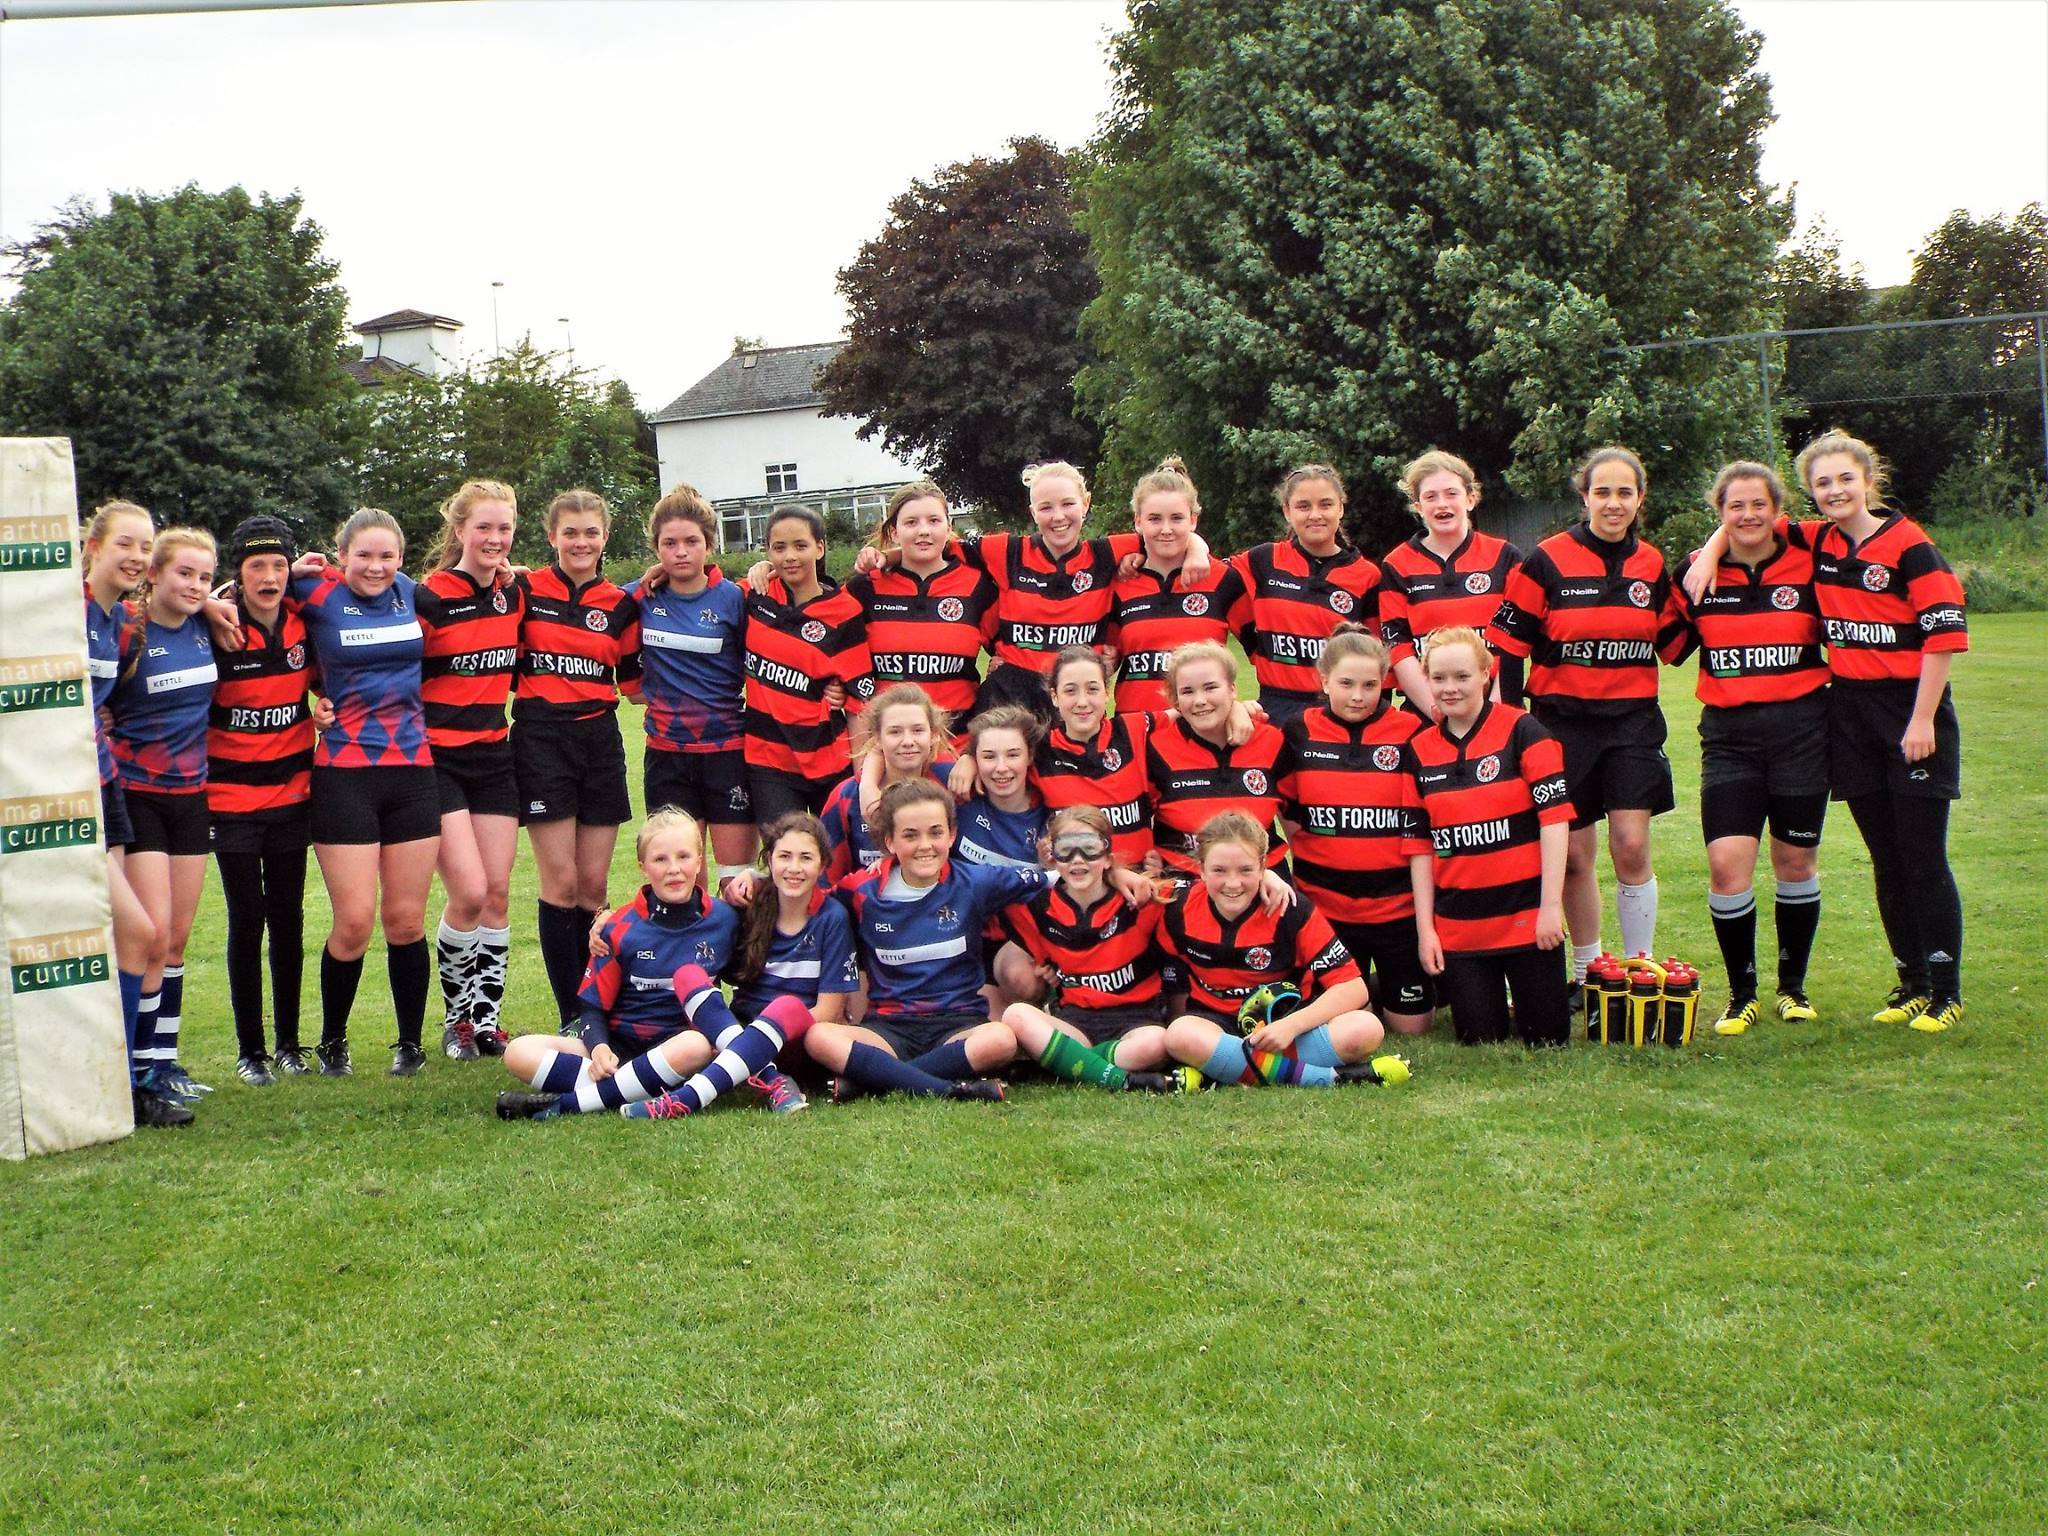 The Dundee Rugby and Howe Harlequins teams after their inaugural match this week.